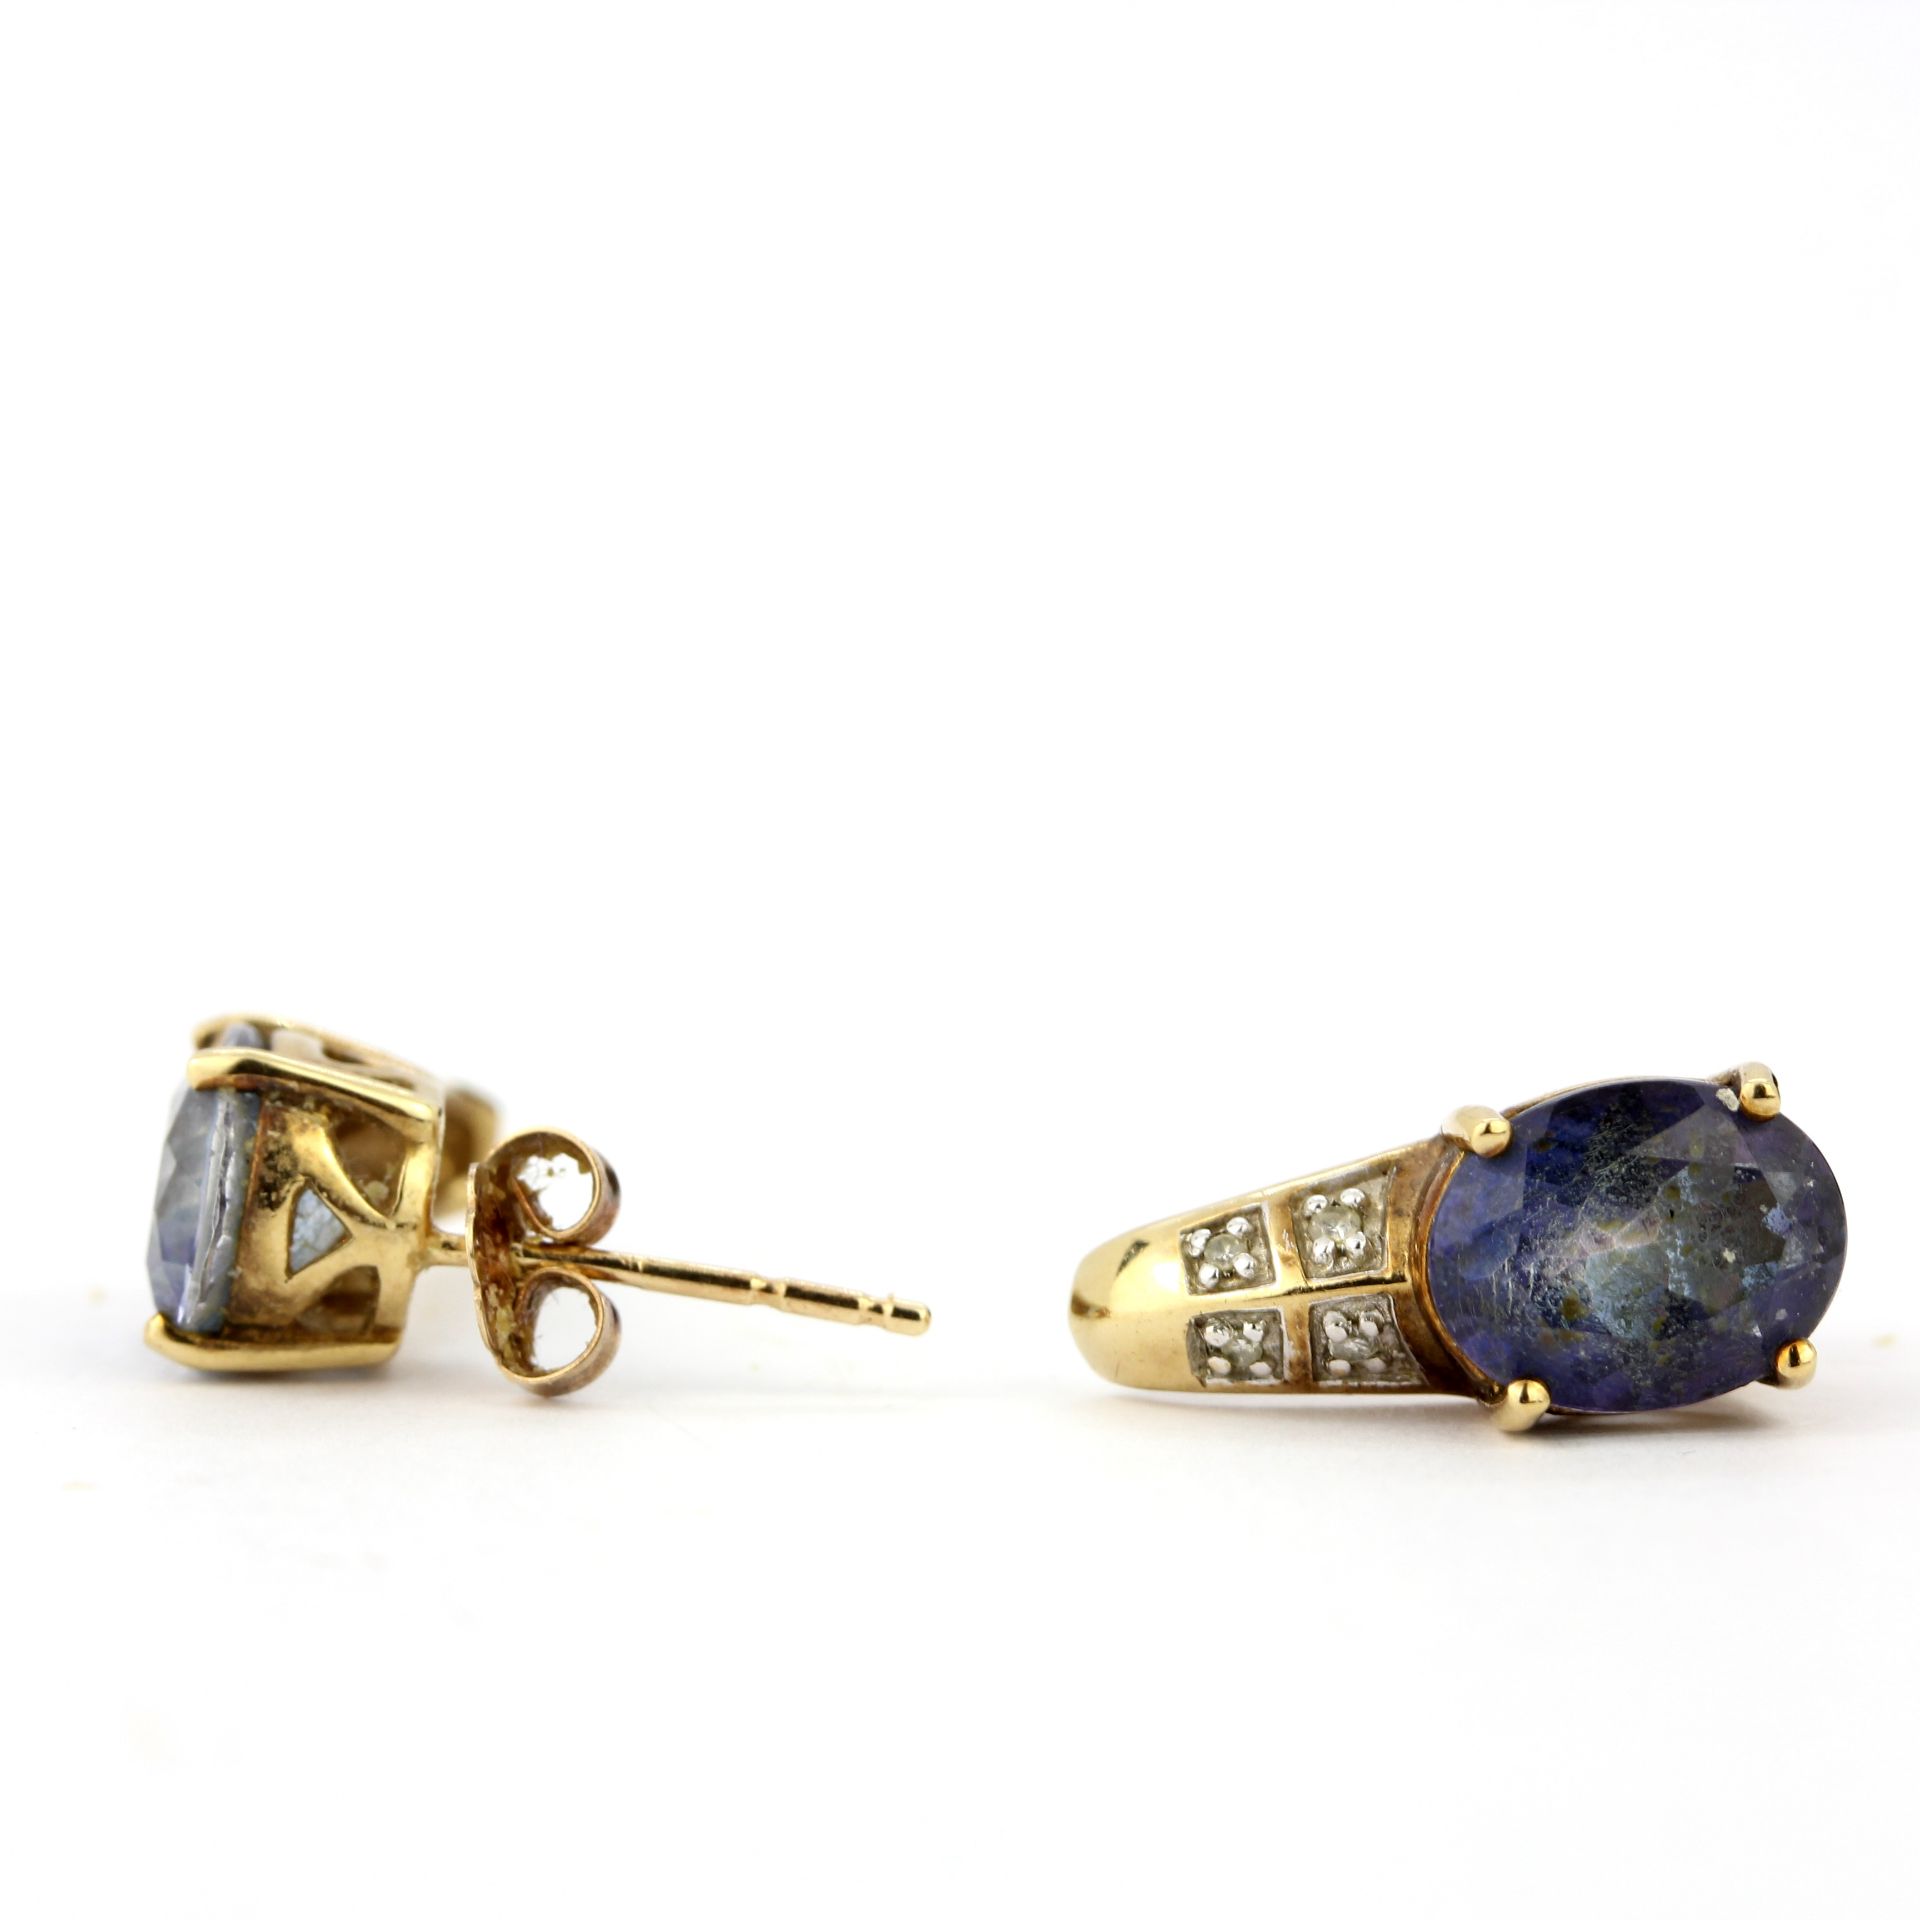 A pair of 9ct yellow gold earrings set with blue topaz and diamonds, L. 1.4cm. - Image 3 of 3